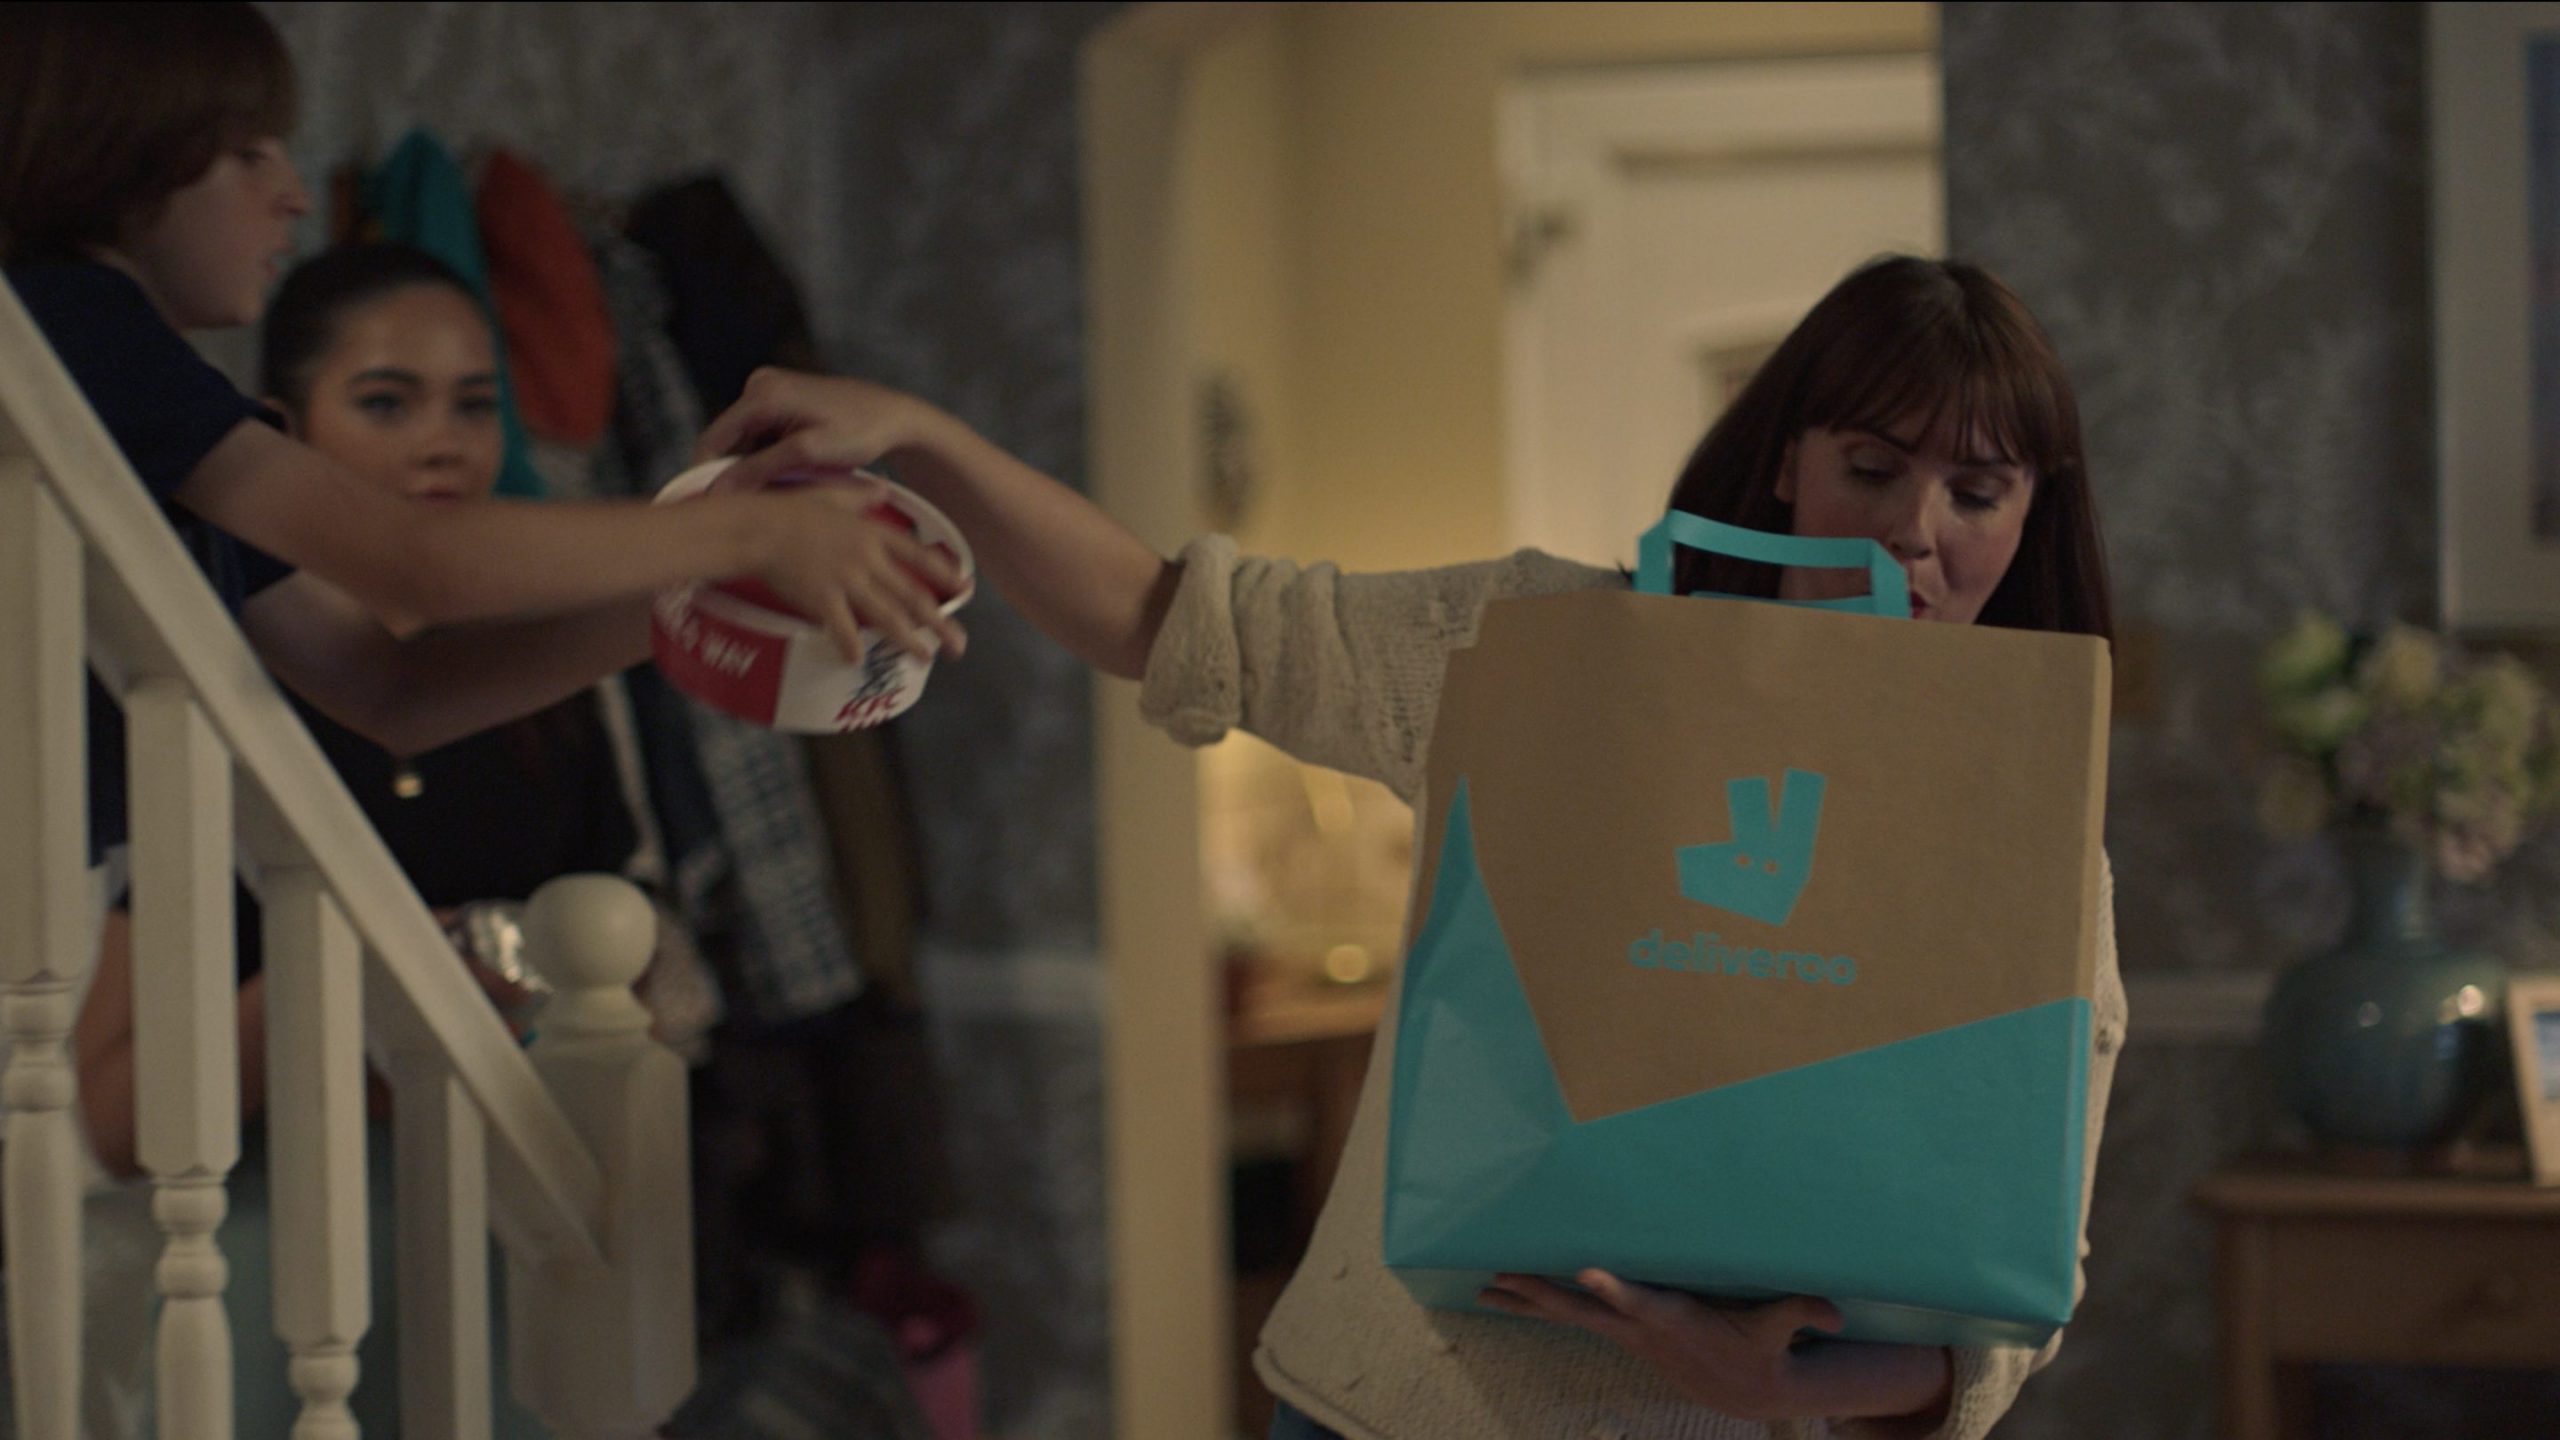 DELIVEROO - The Bag